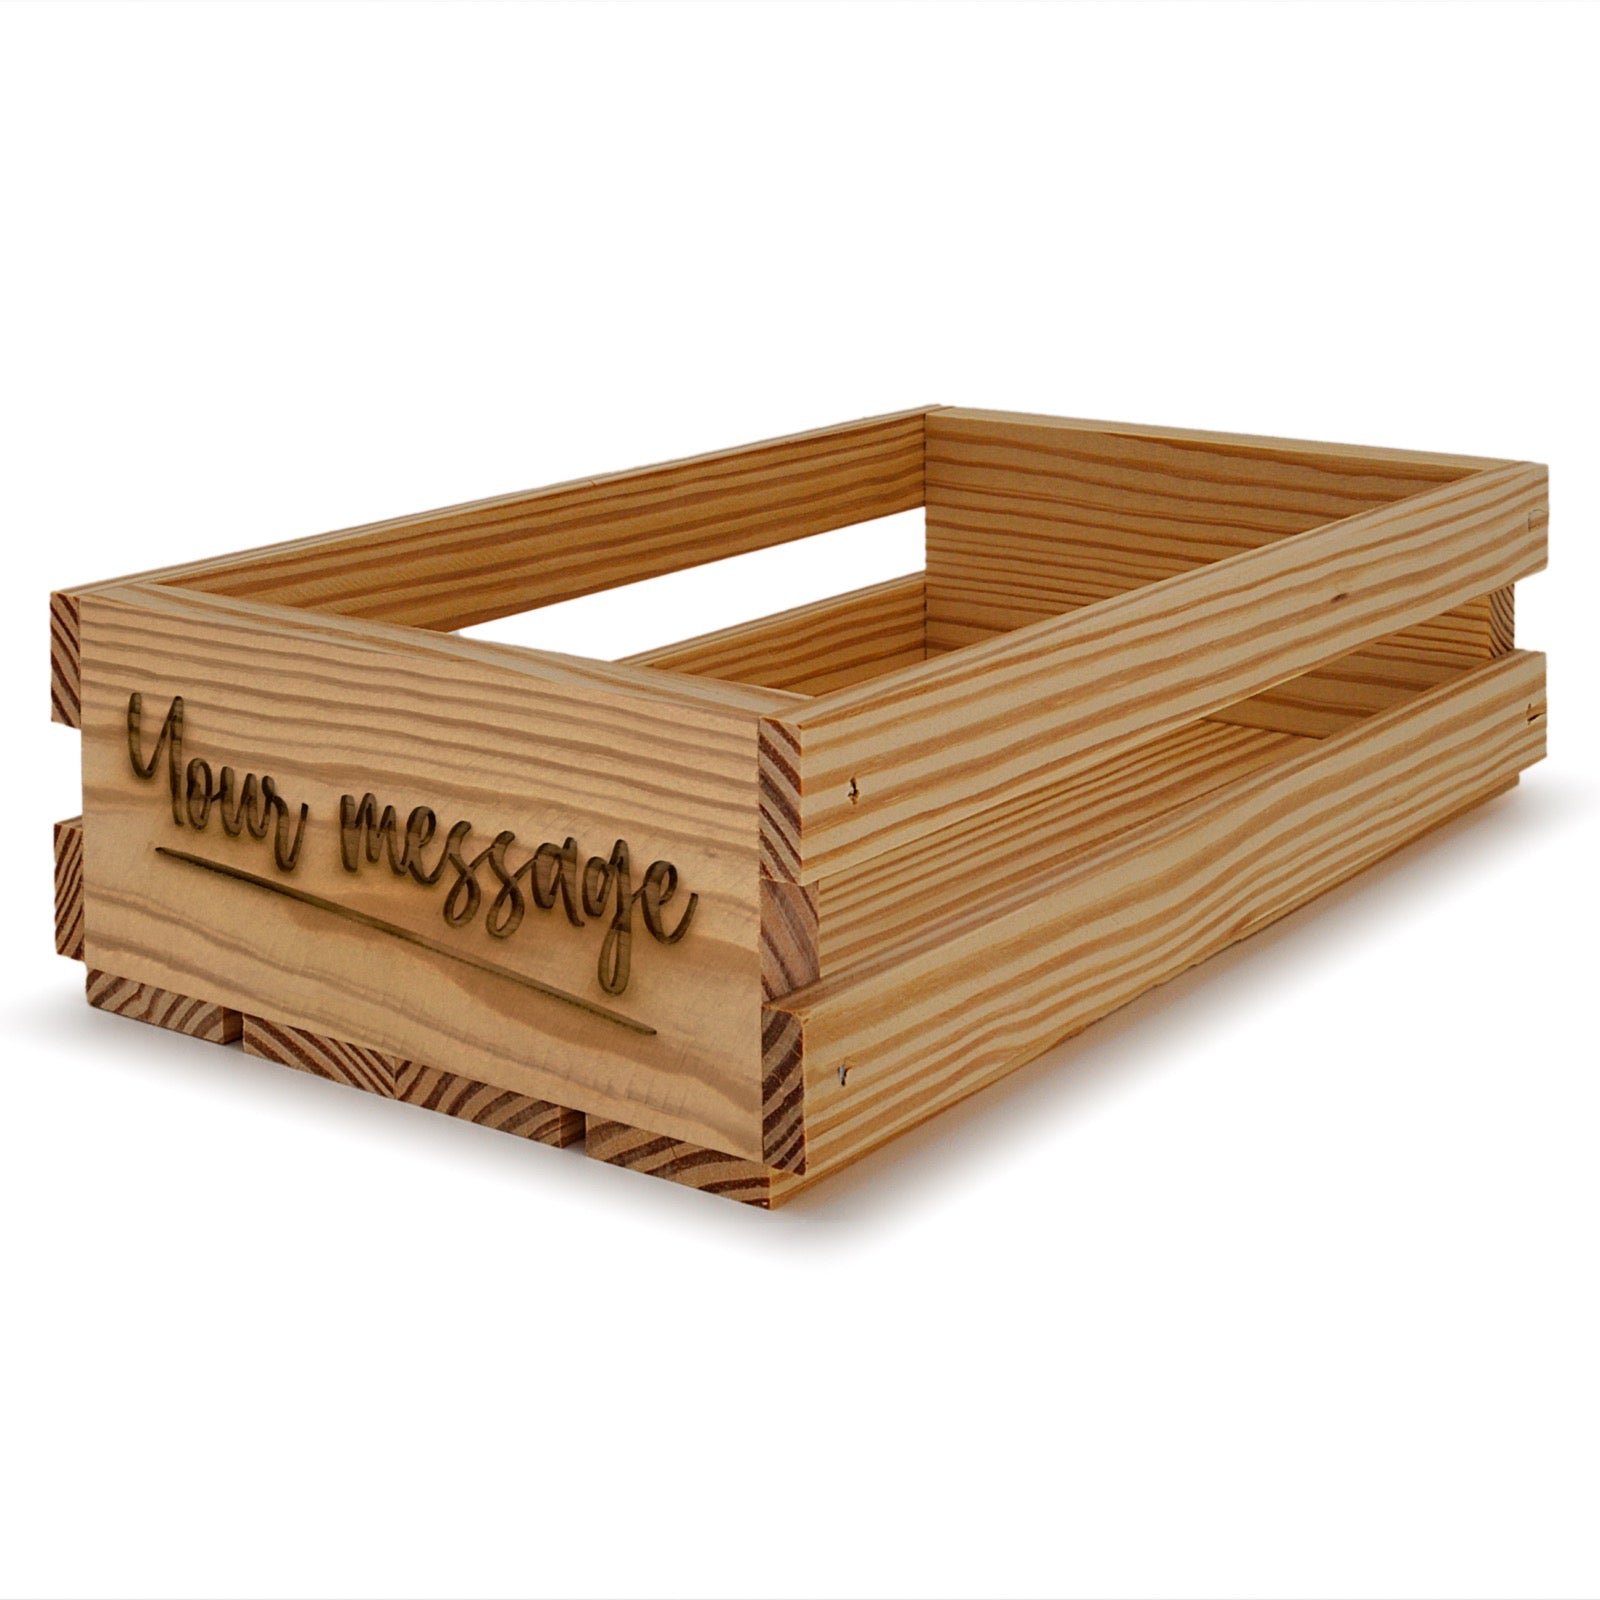 Small wooden crates 13x7.5x3.5 your message included, 6-SS-13-7.5-3.5-ST-NW-NL, 12-SS-13-7.5-3.5-ST-NW-NL, 24-SS-13-7.5-3.5-ST-NW-NL, 48-SS-13-7.5-3.5-ST-NW-NL, 96-SS-13-7.5-3.5-ST-NW-NL